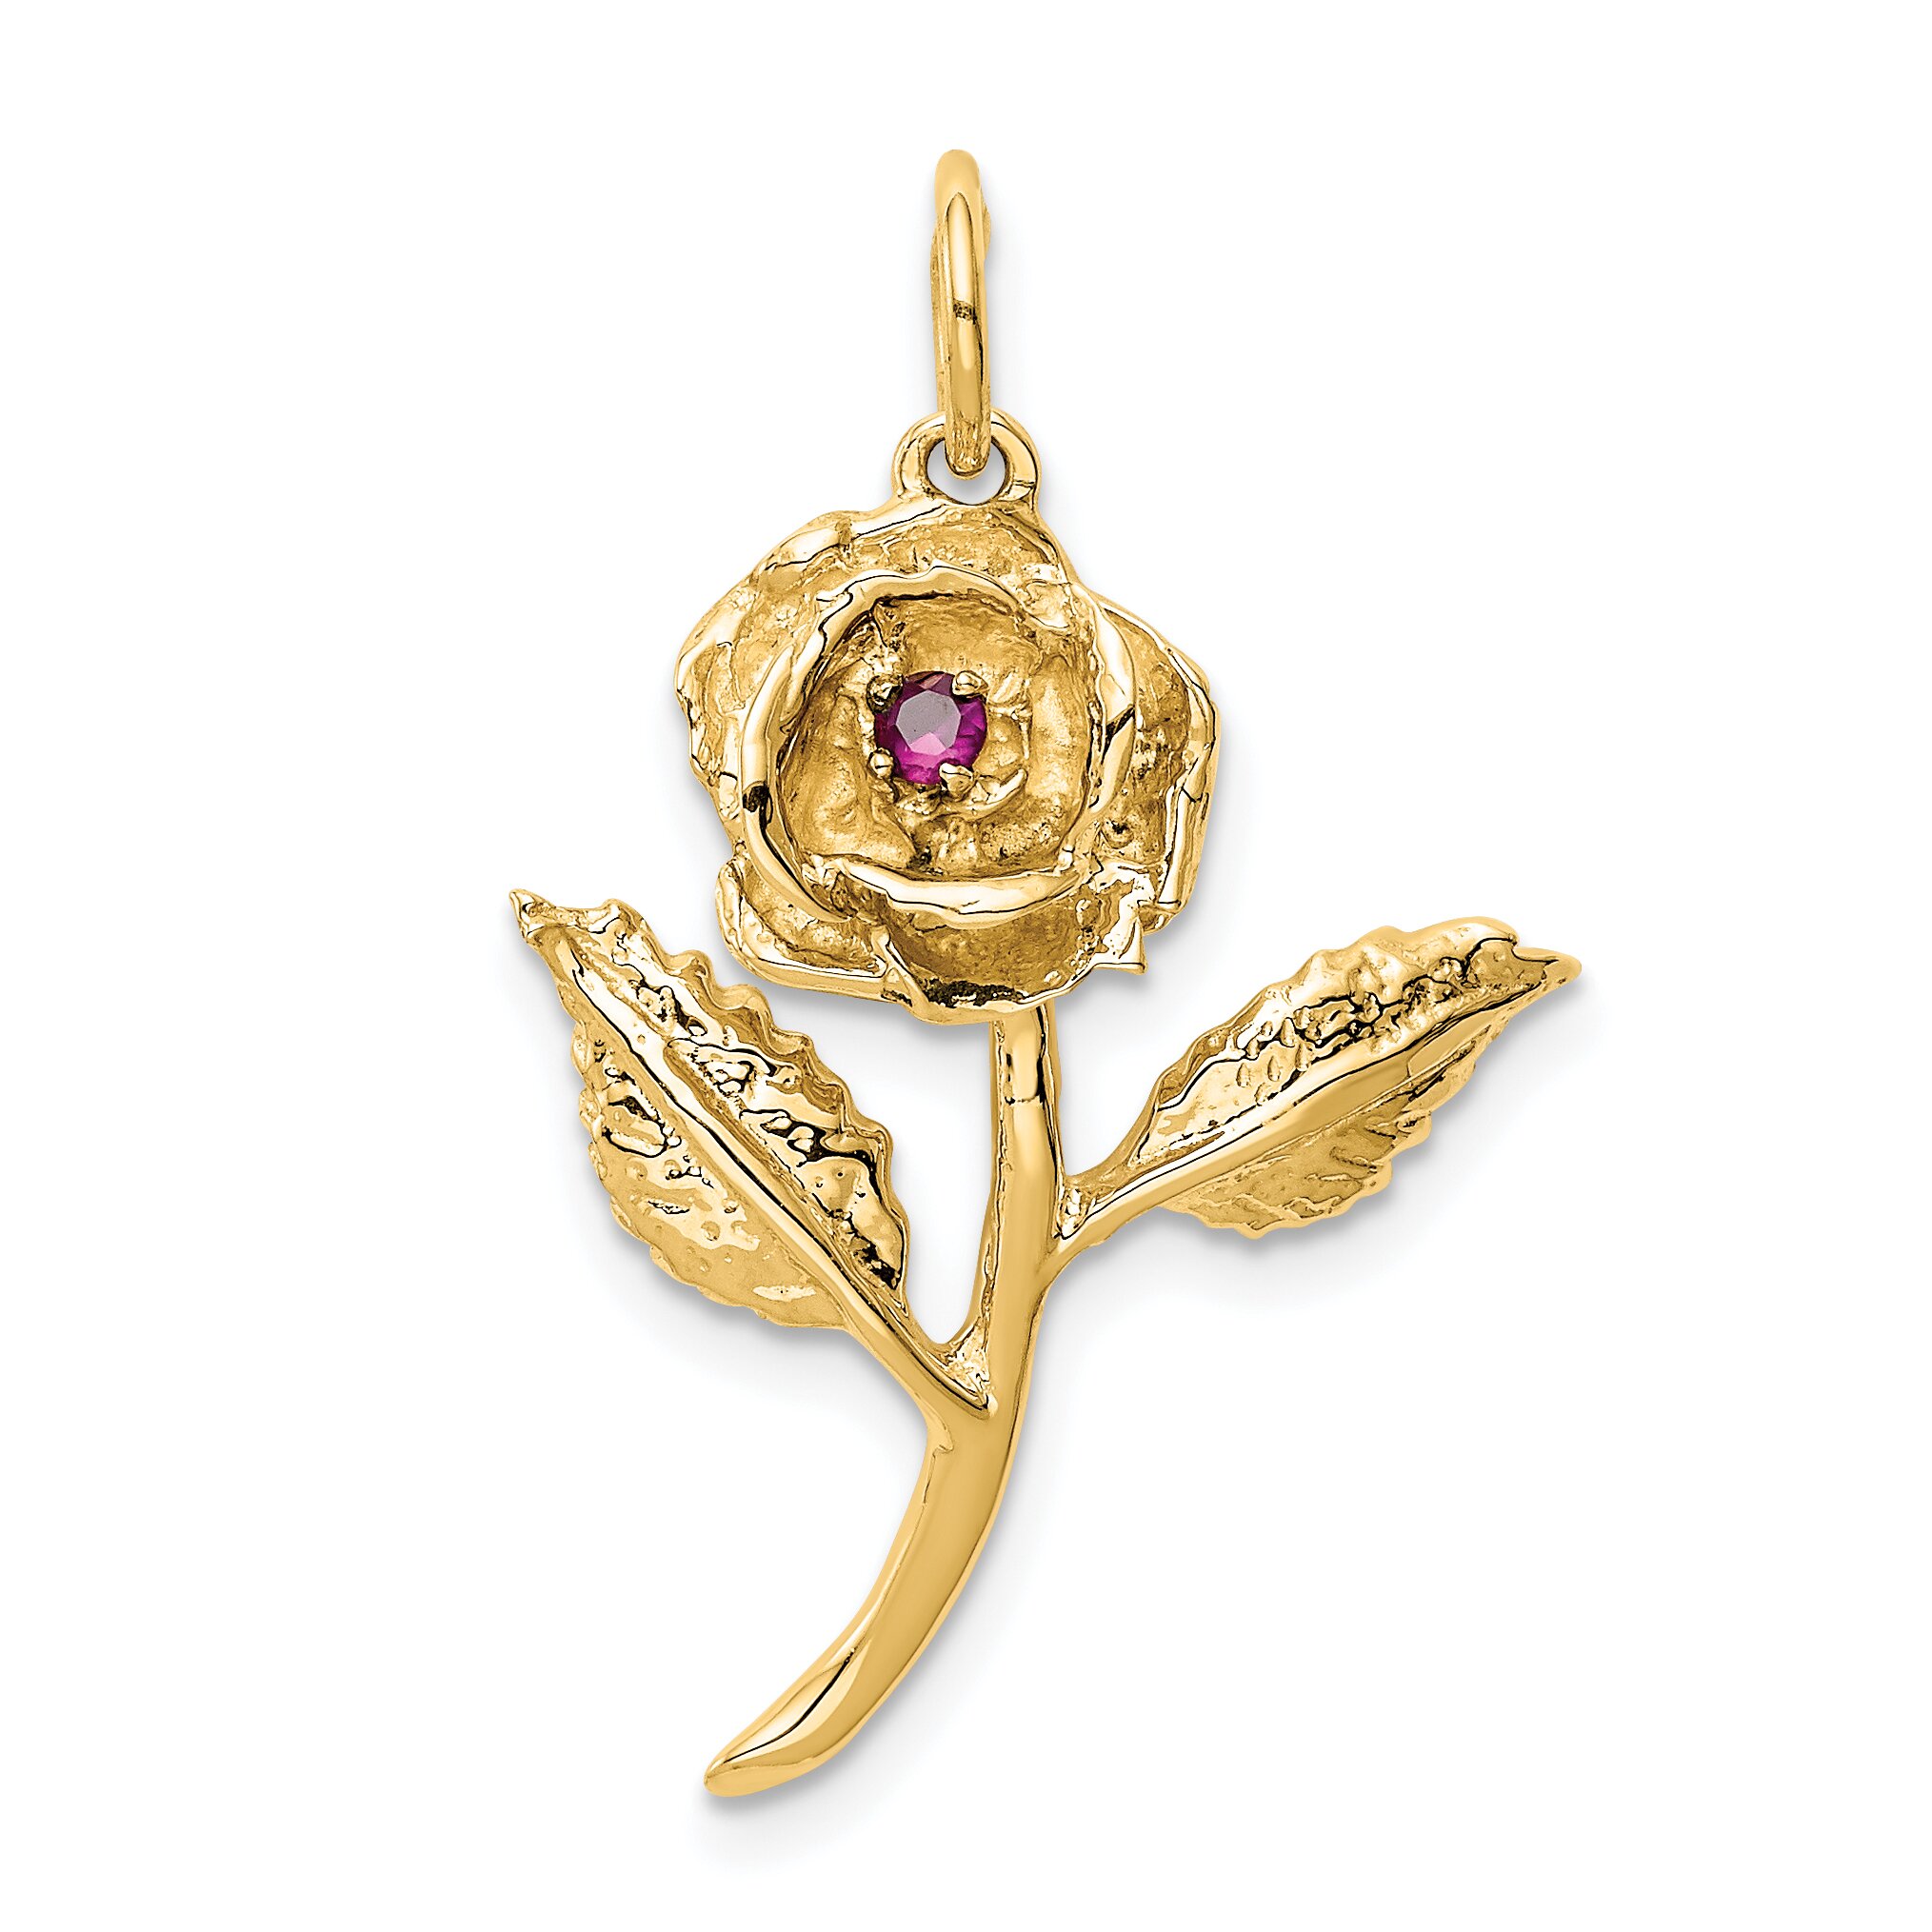 Findingking 14K Yellow Gold 3D Rose Charm